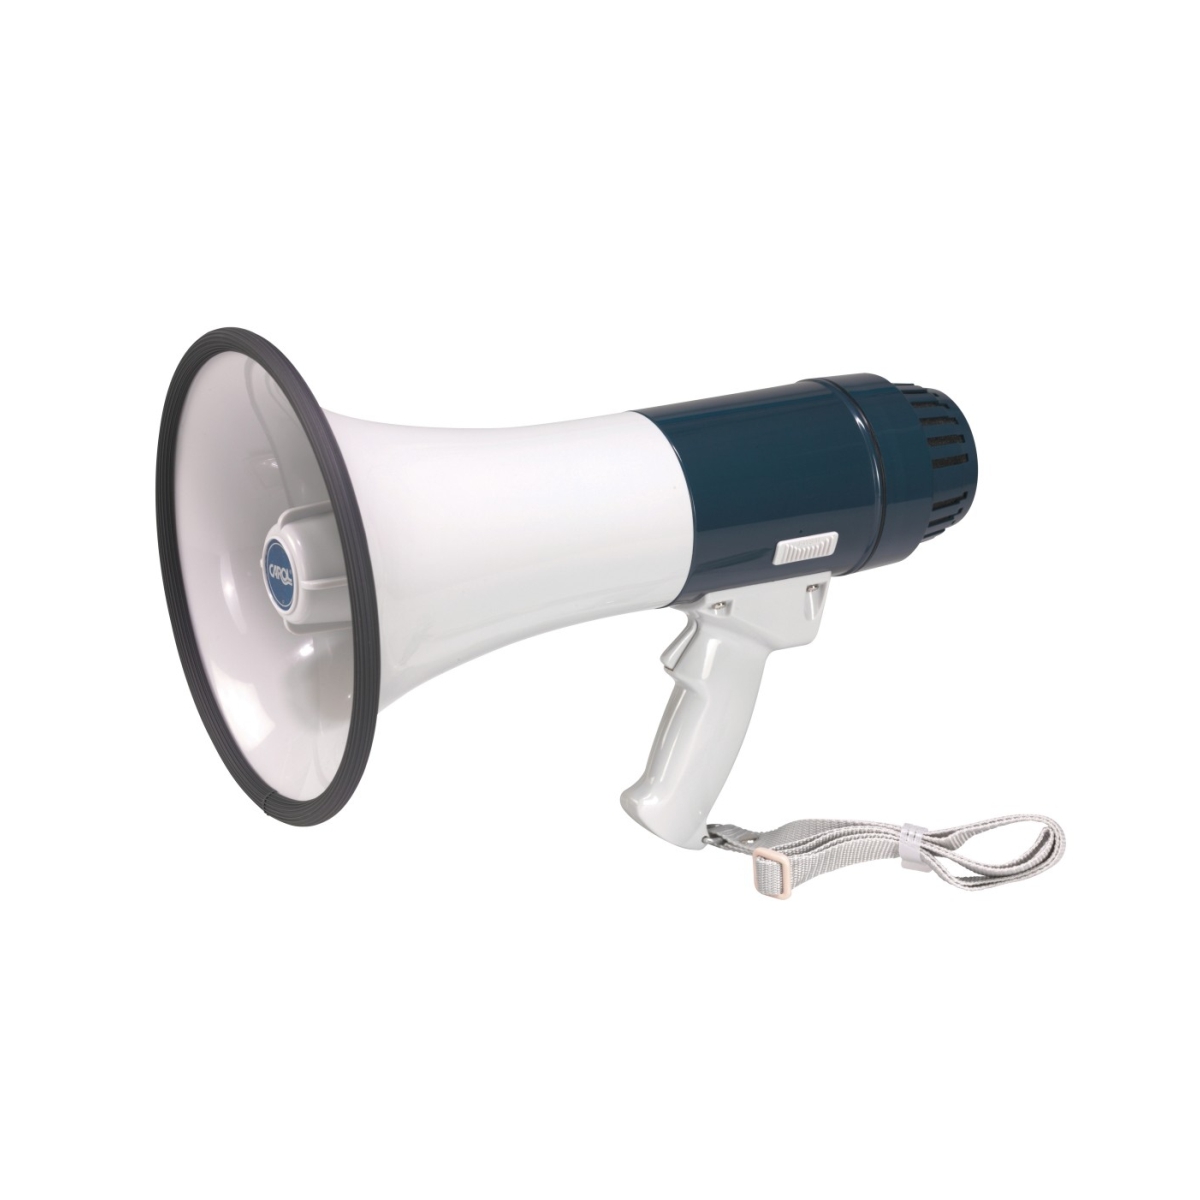 LOUD HAILER WITH BUILT-IN MICROPHONE